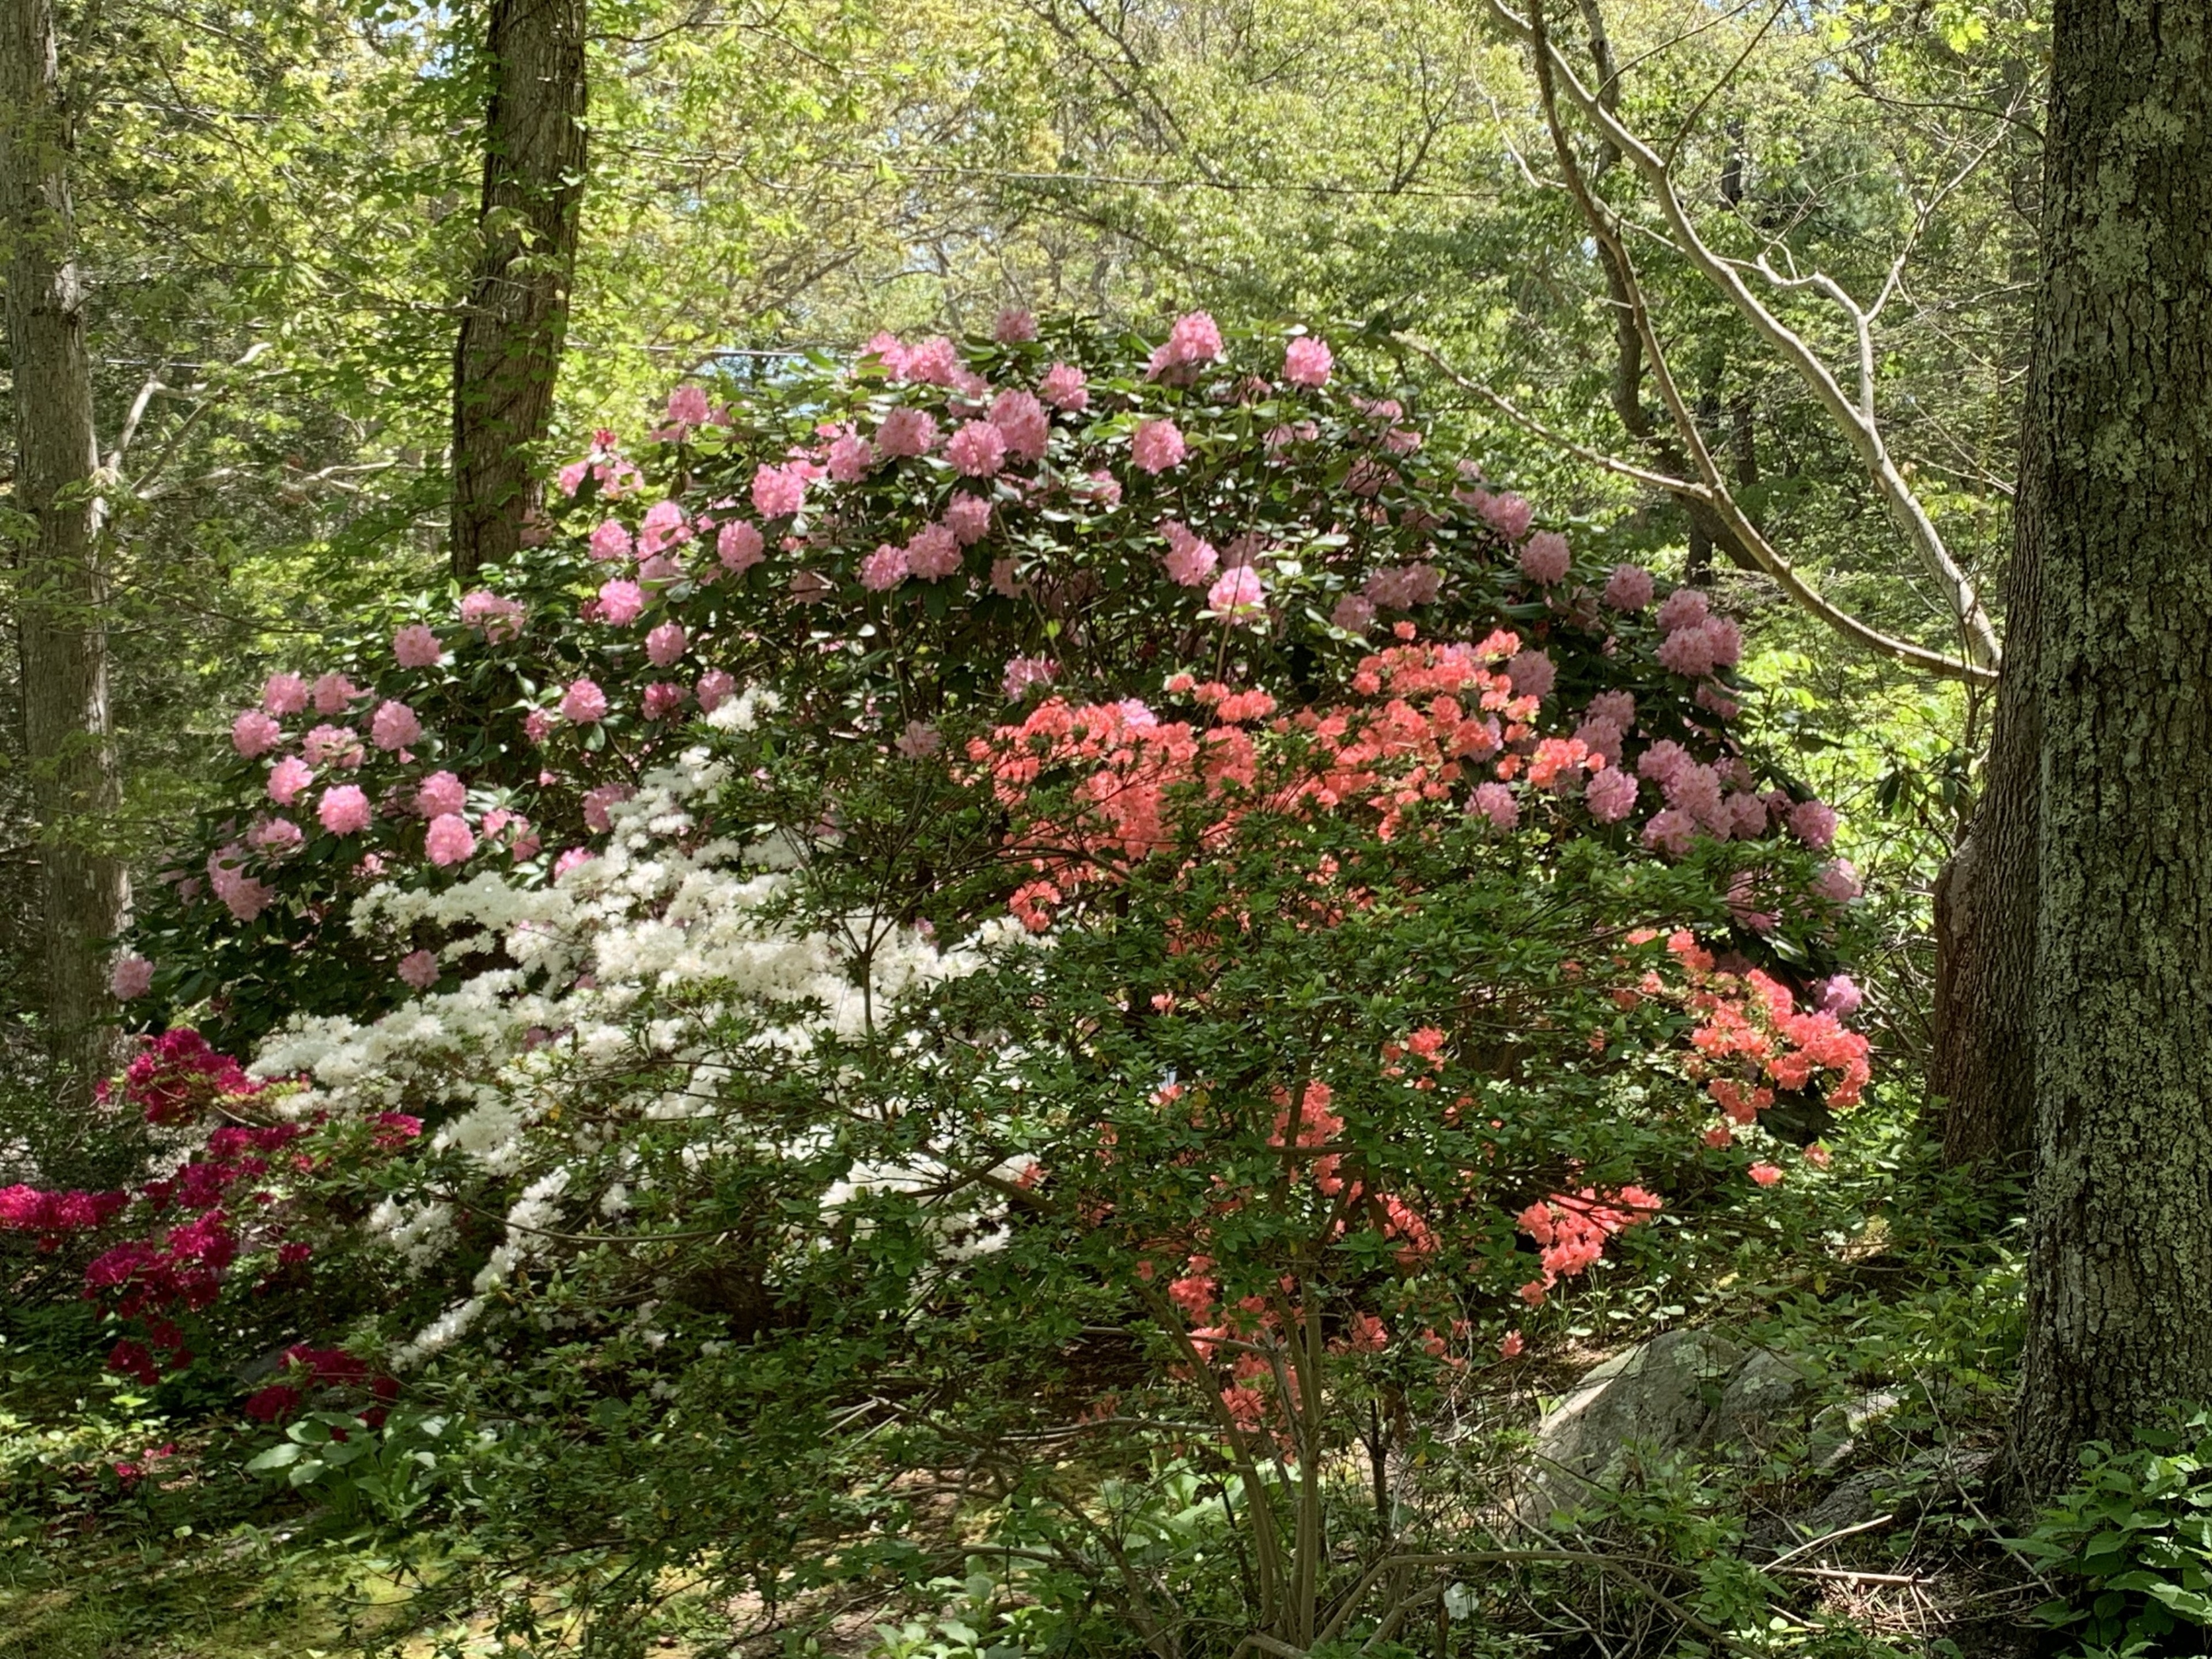 Spout Gardens is a private but open to the public garden in Woods Hole, MA.  Mid-spring is a wonderful time to visit with the azaleas in full bloom.  It also includes collections of antique millstones and ship anchors scattered about an easy walking site.  Best of all, it’s free but does accept donations.